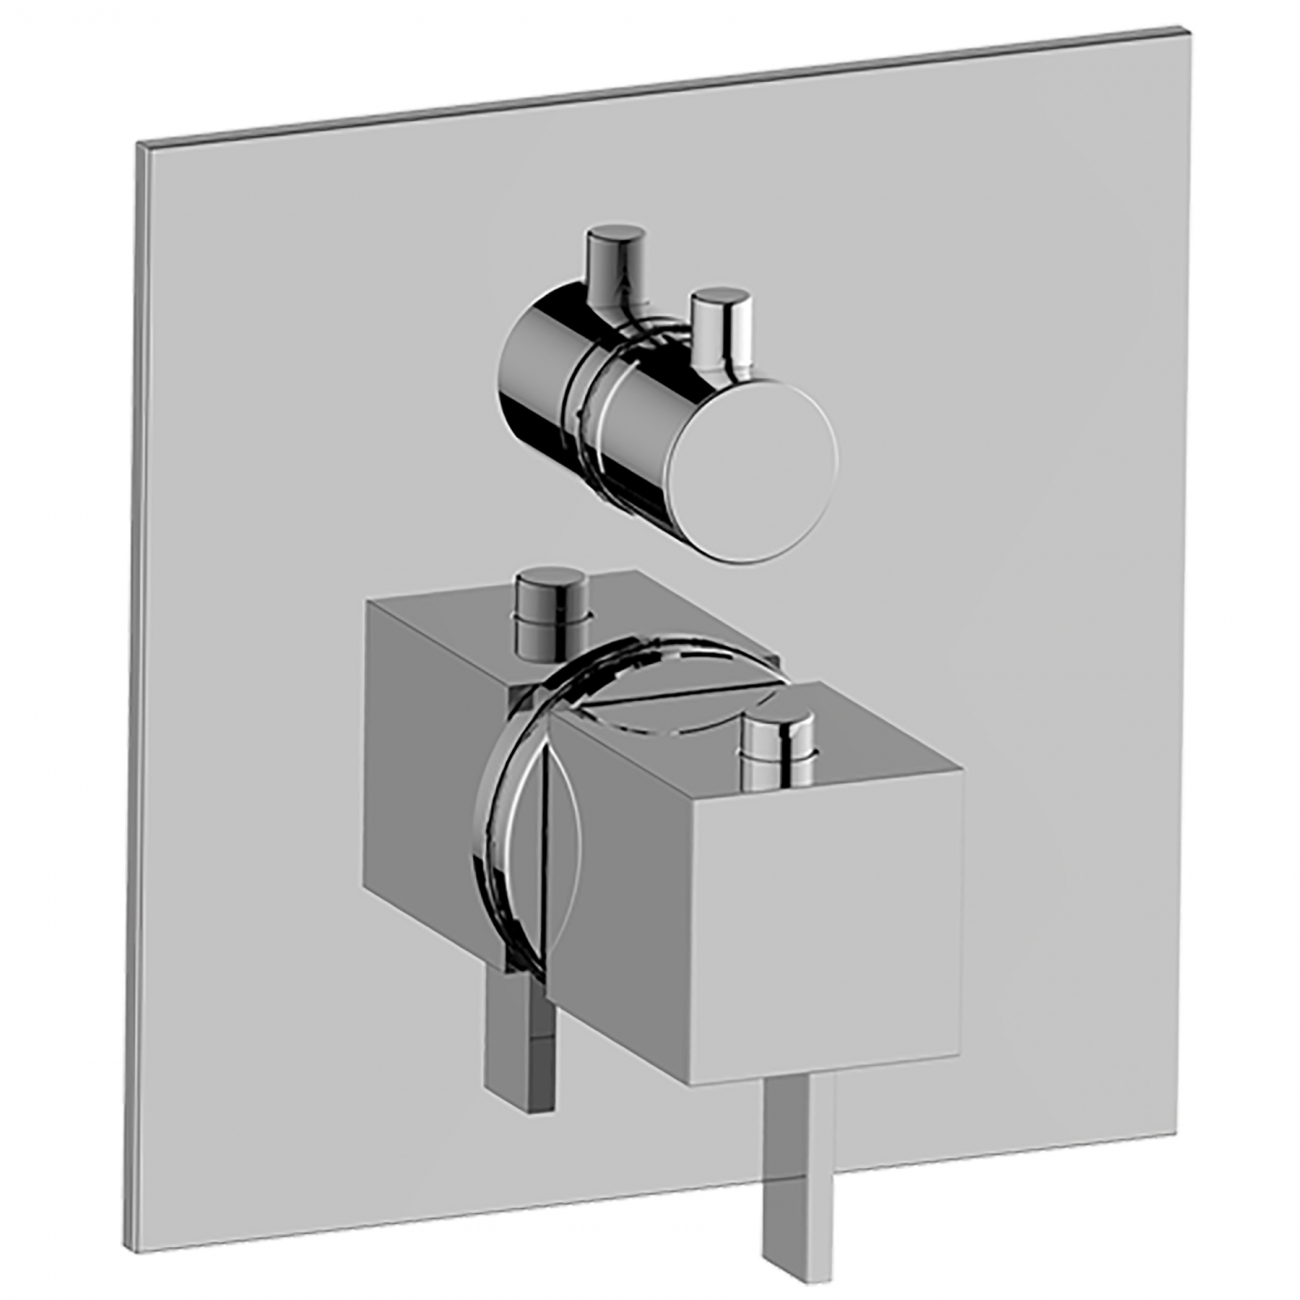 Graff Qubic wall mounted thermostatic